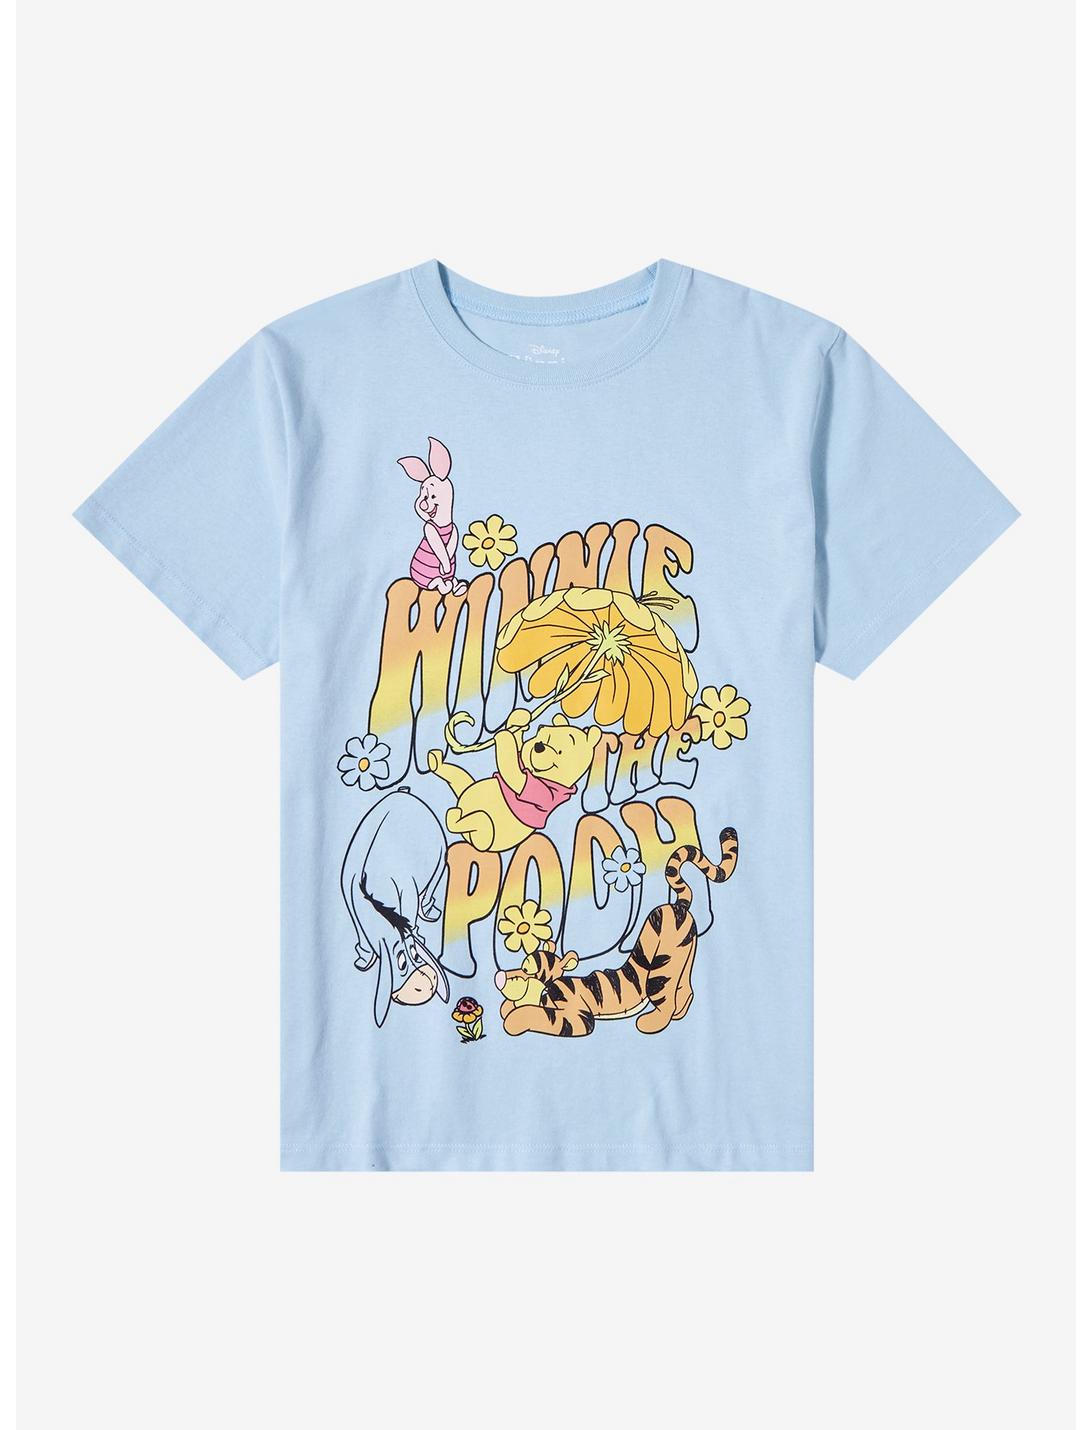 Disney Winnie the Pooh Floral Group Portrait Youth T-Shirt - BoxLunch Exclusive, LIGHT BLUE, hi-res